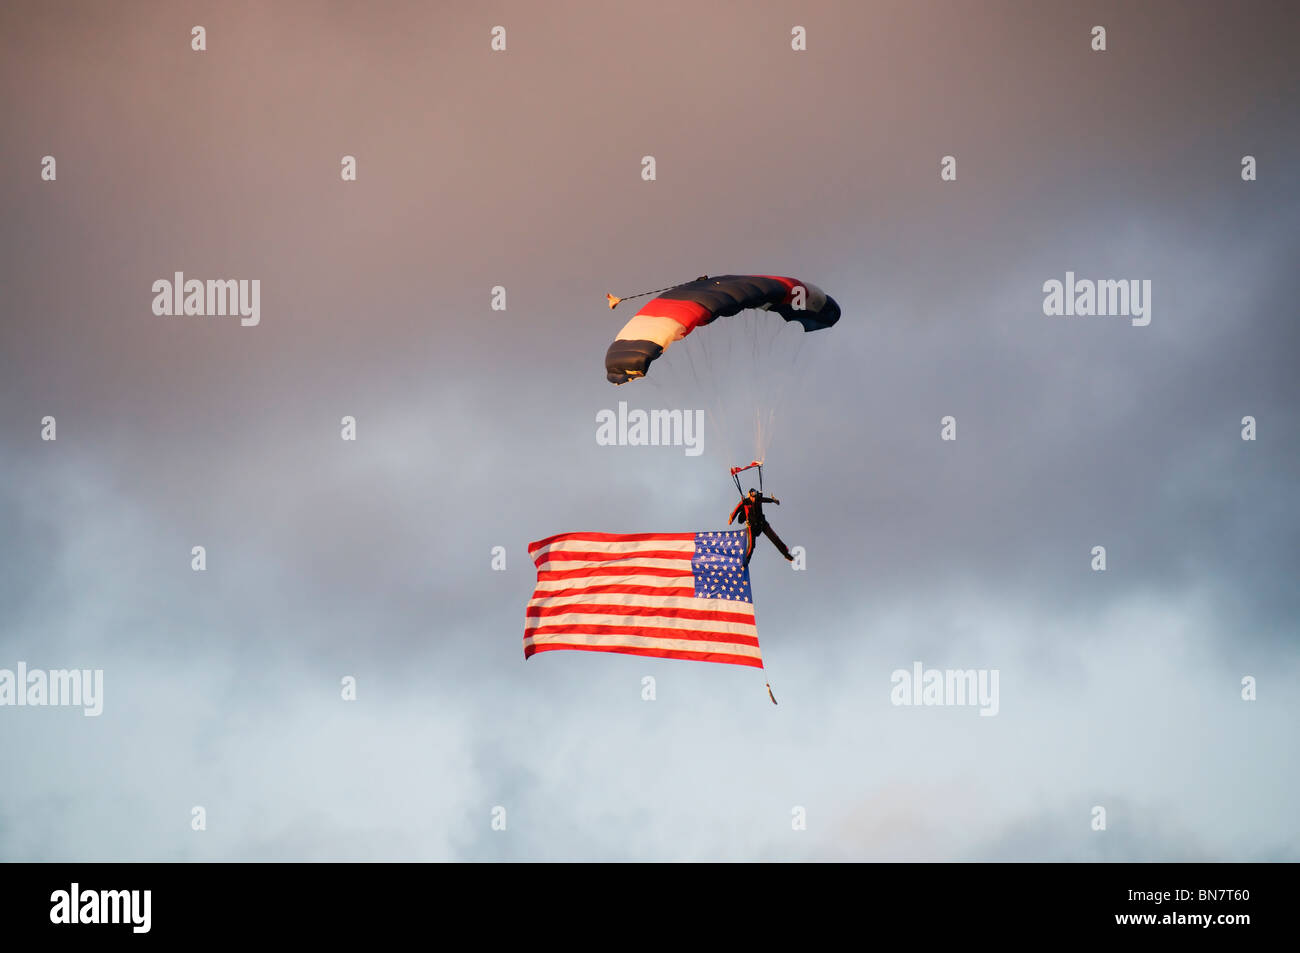 A skydiver with an American flag soars through the air over the excited crowd at the Artesian Family Festival in Tumwater, WA. Stock Photo